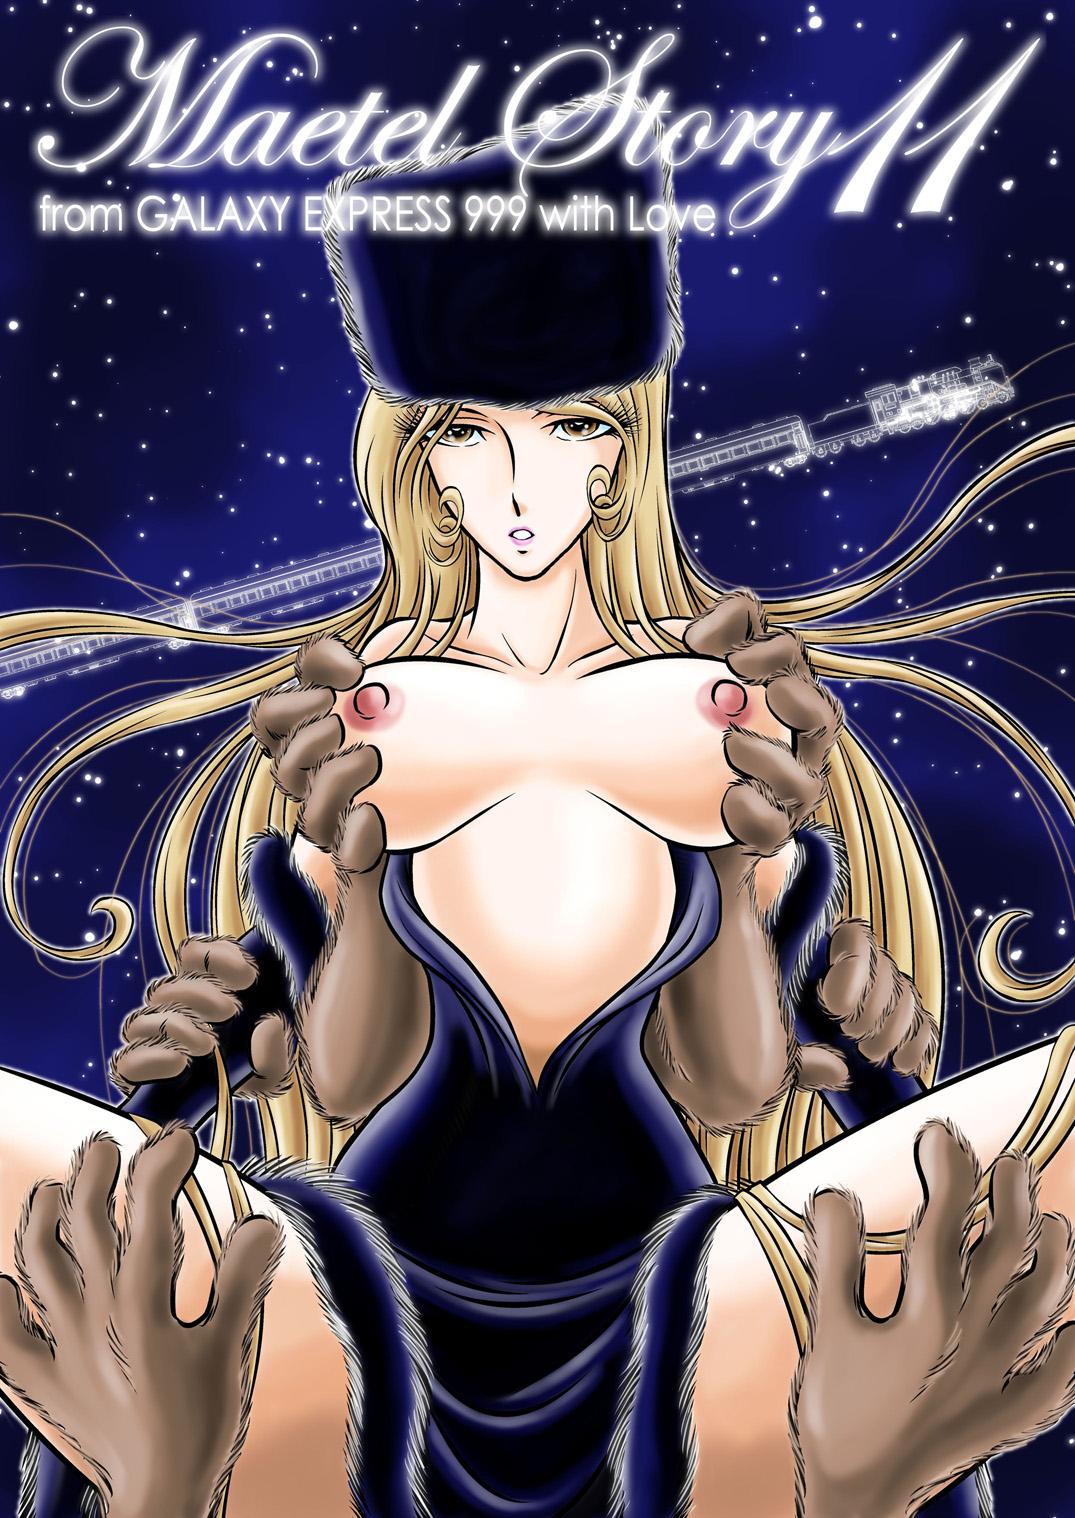 Hardcore Free Porn Maetel Story 11 - Galaxy express 999 French Porn - Page 1